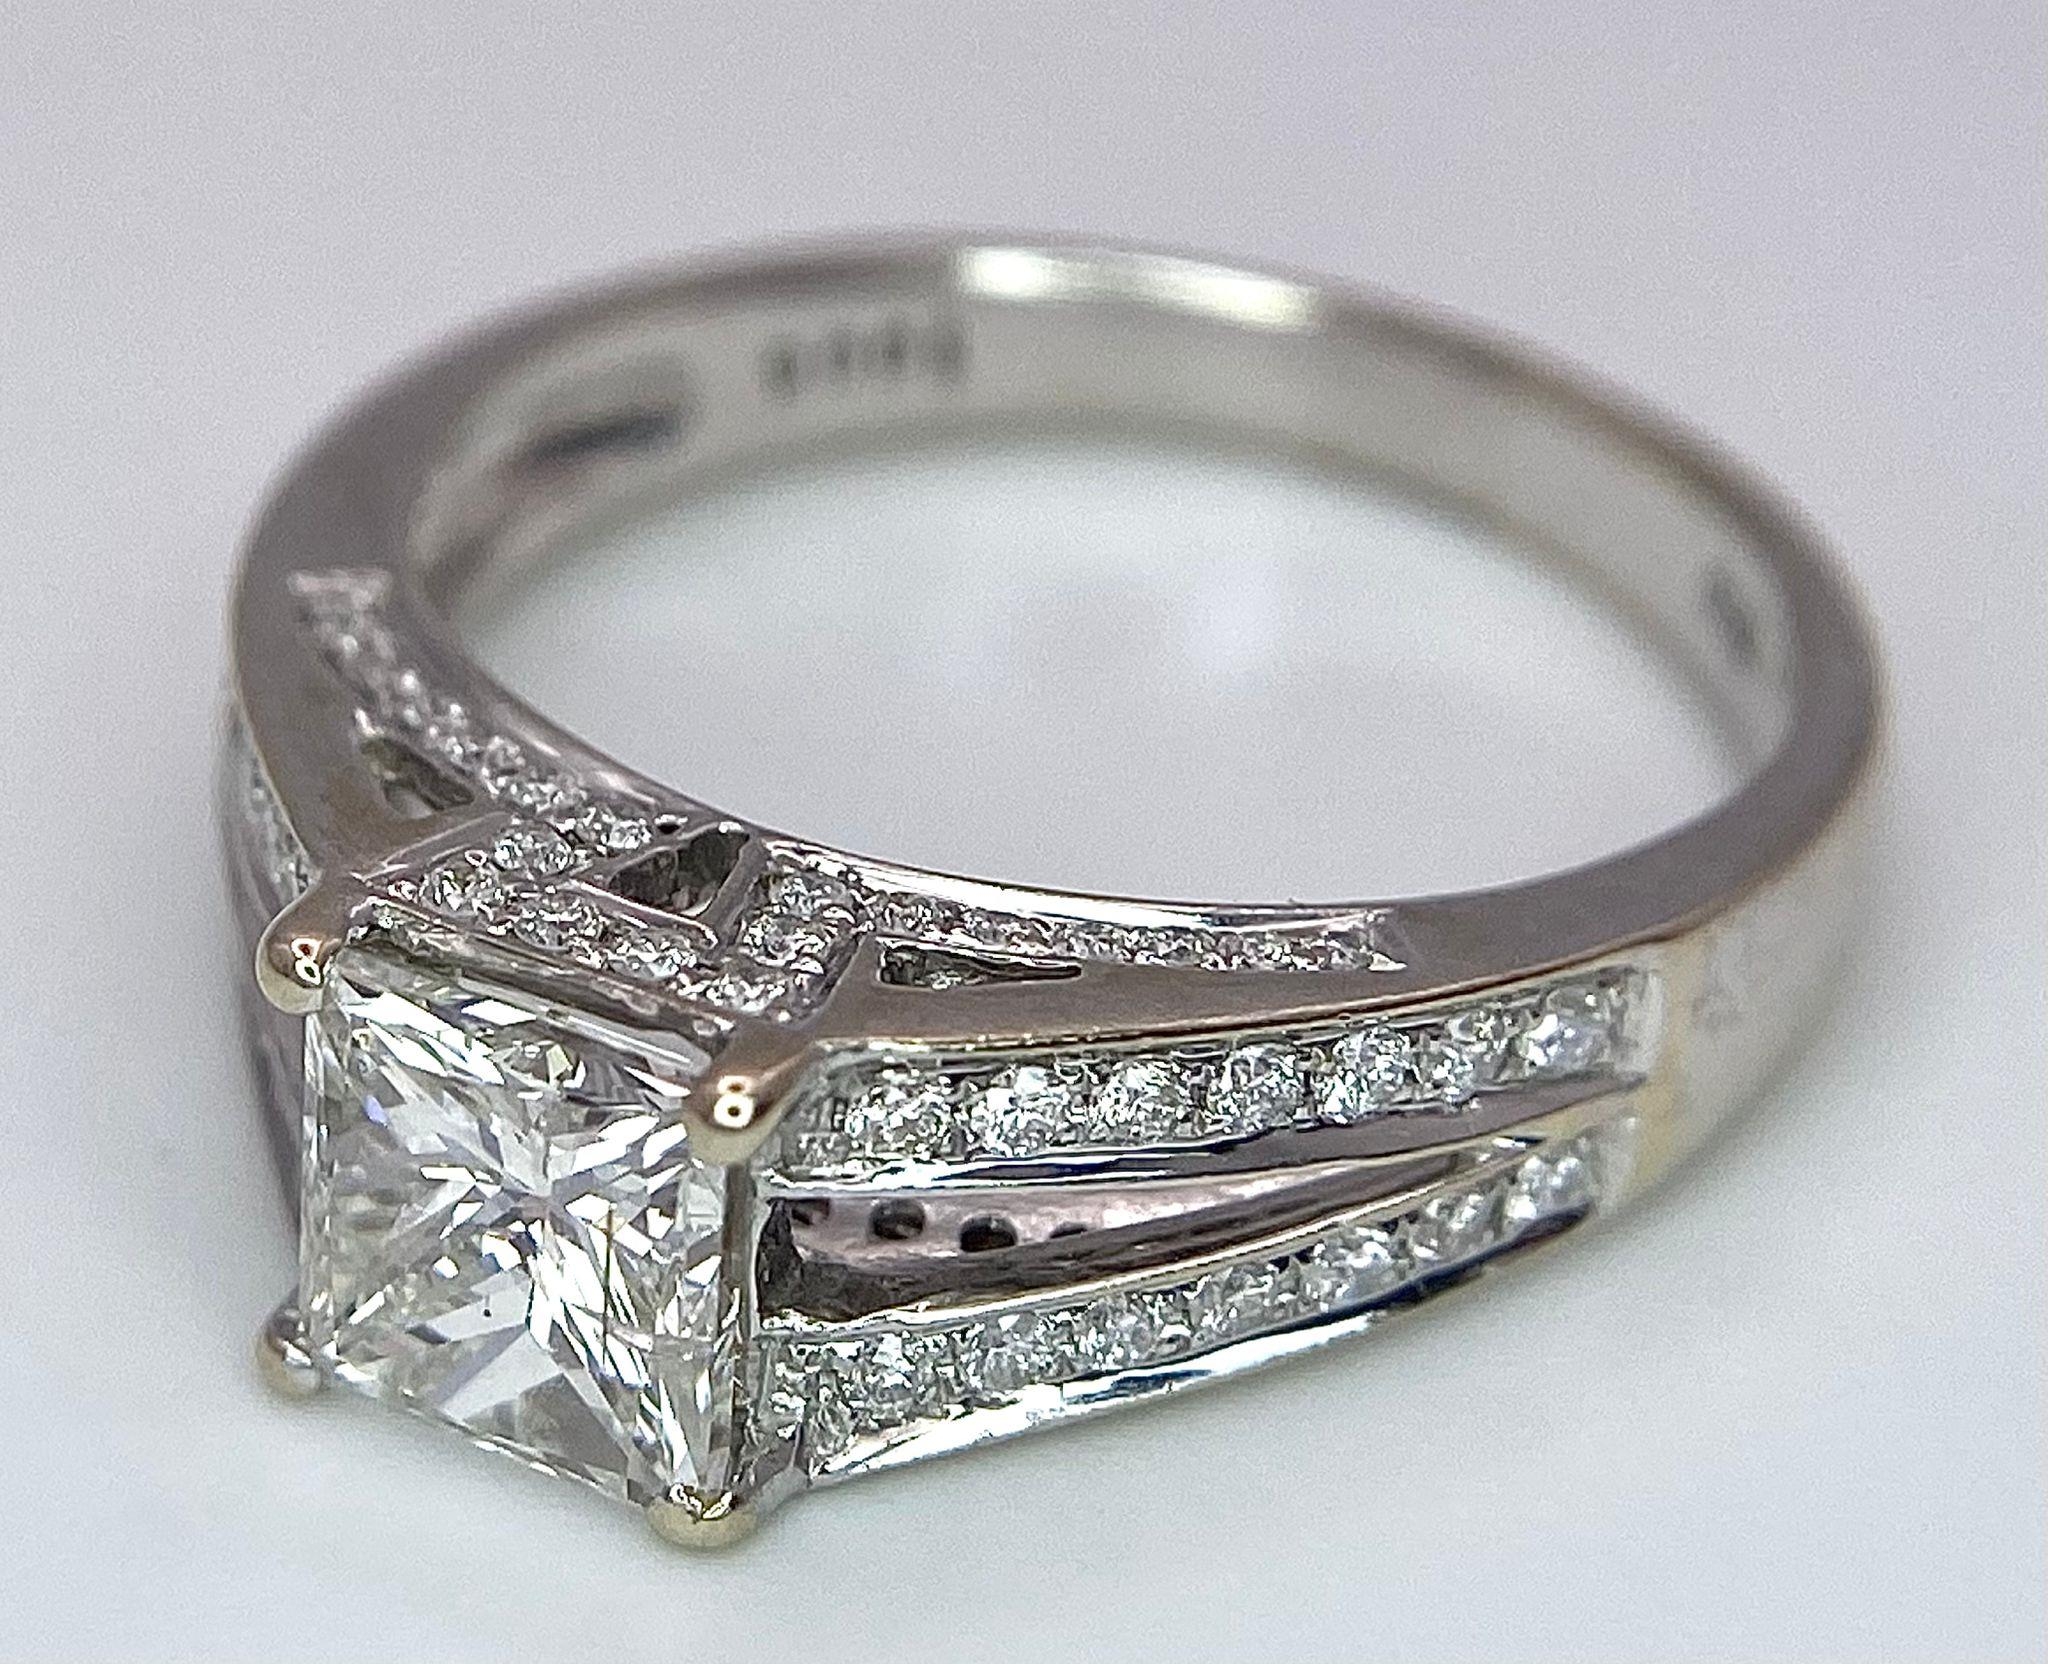 An 18K White Gold Diamond Ring. Central VS2 1ct Princess Cut Near White Diamond with Round Cut - Image 6 of 10